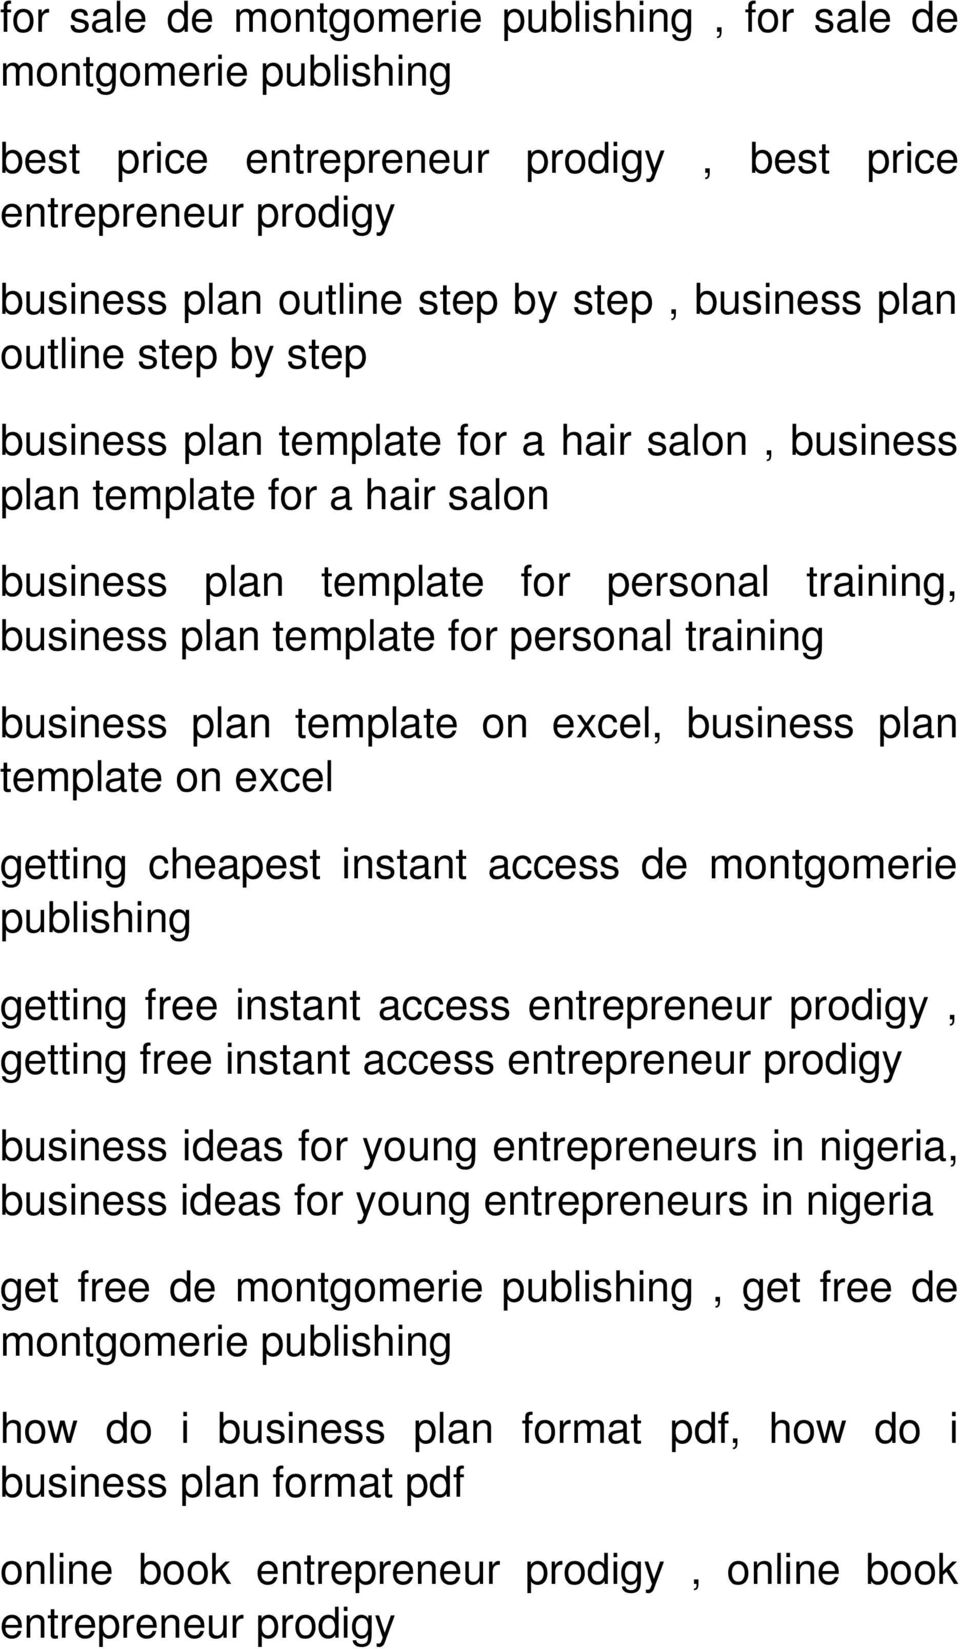 Business plan in india pdf download